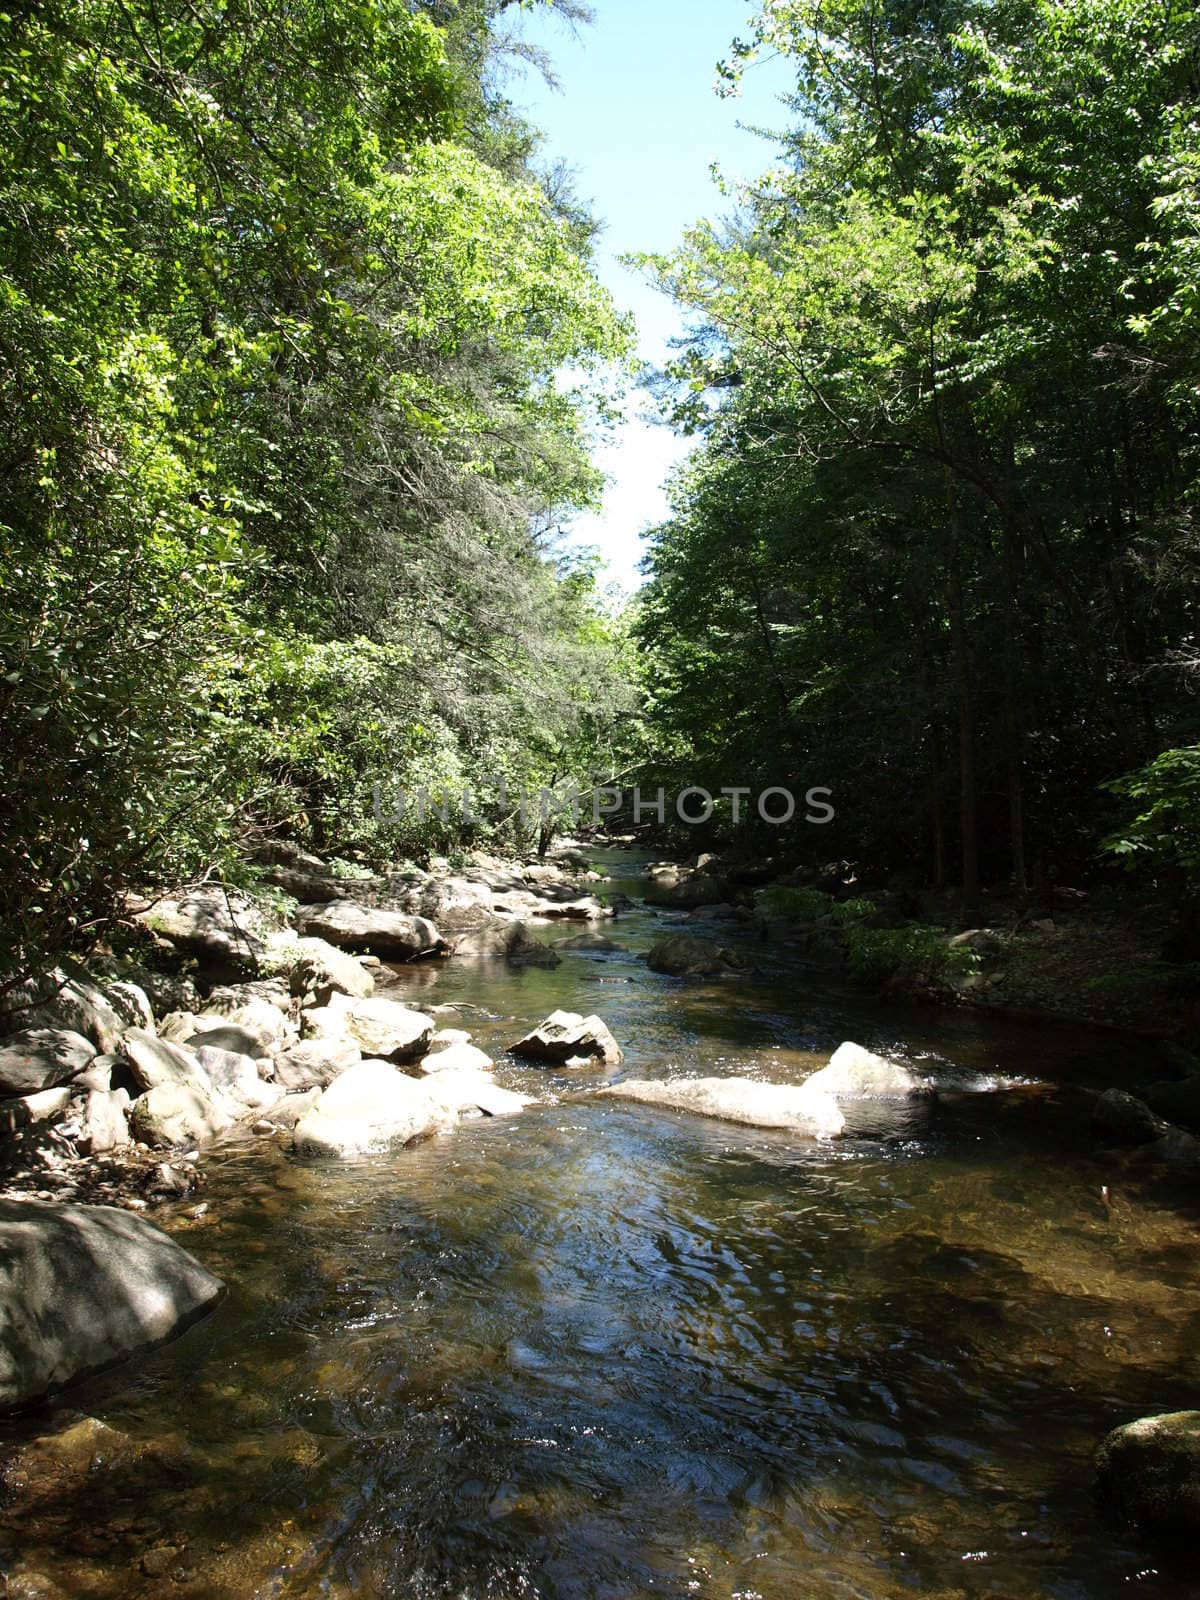 Mountain creek in the spring of the year in rural North Carolina